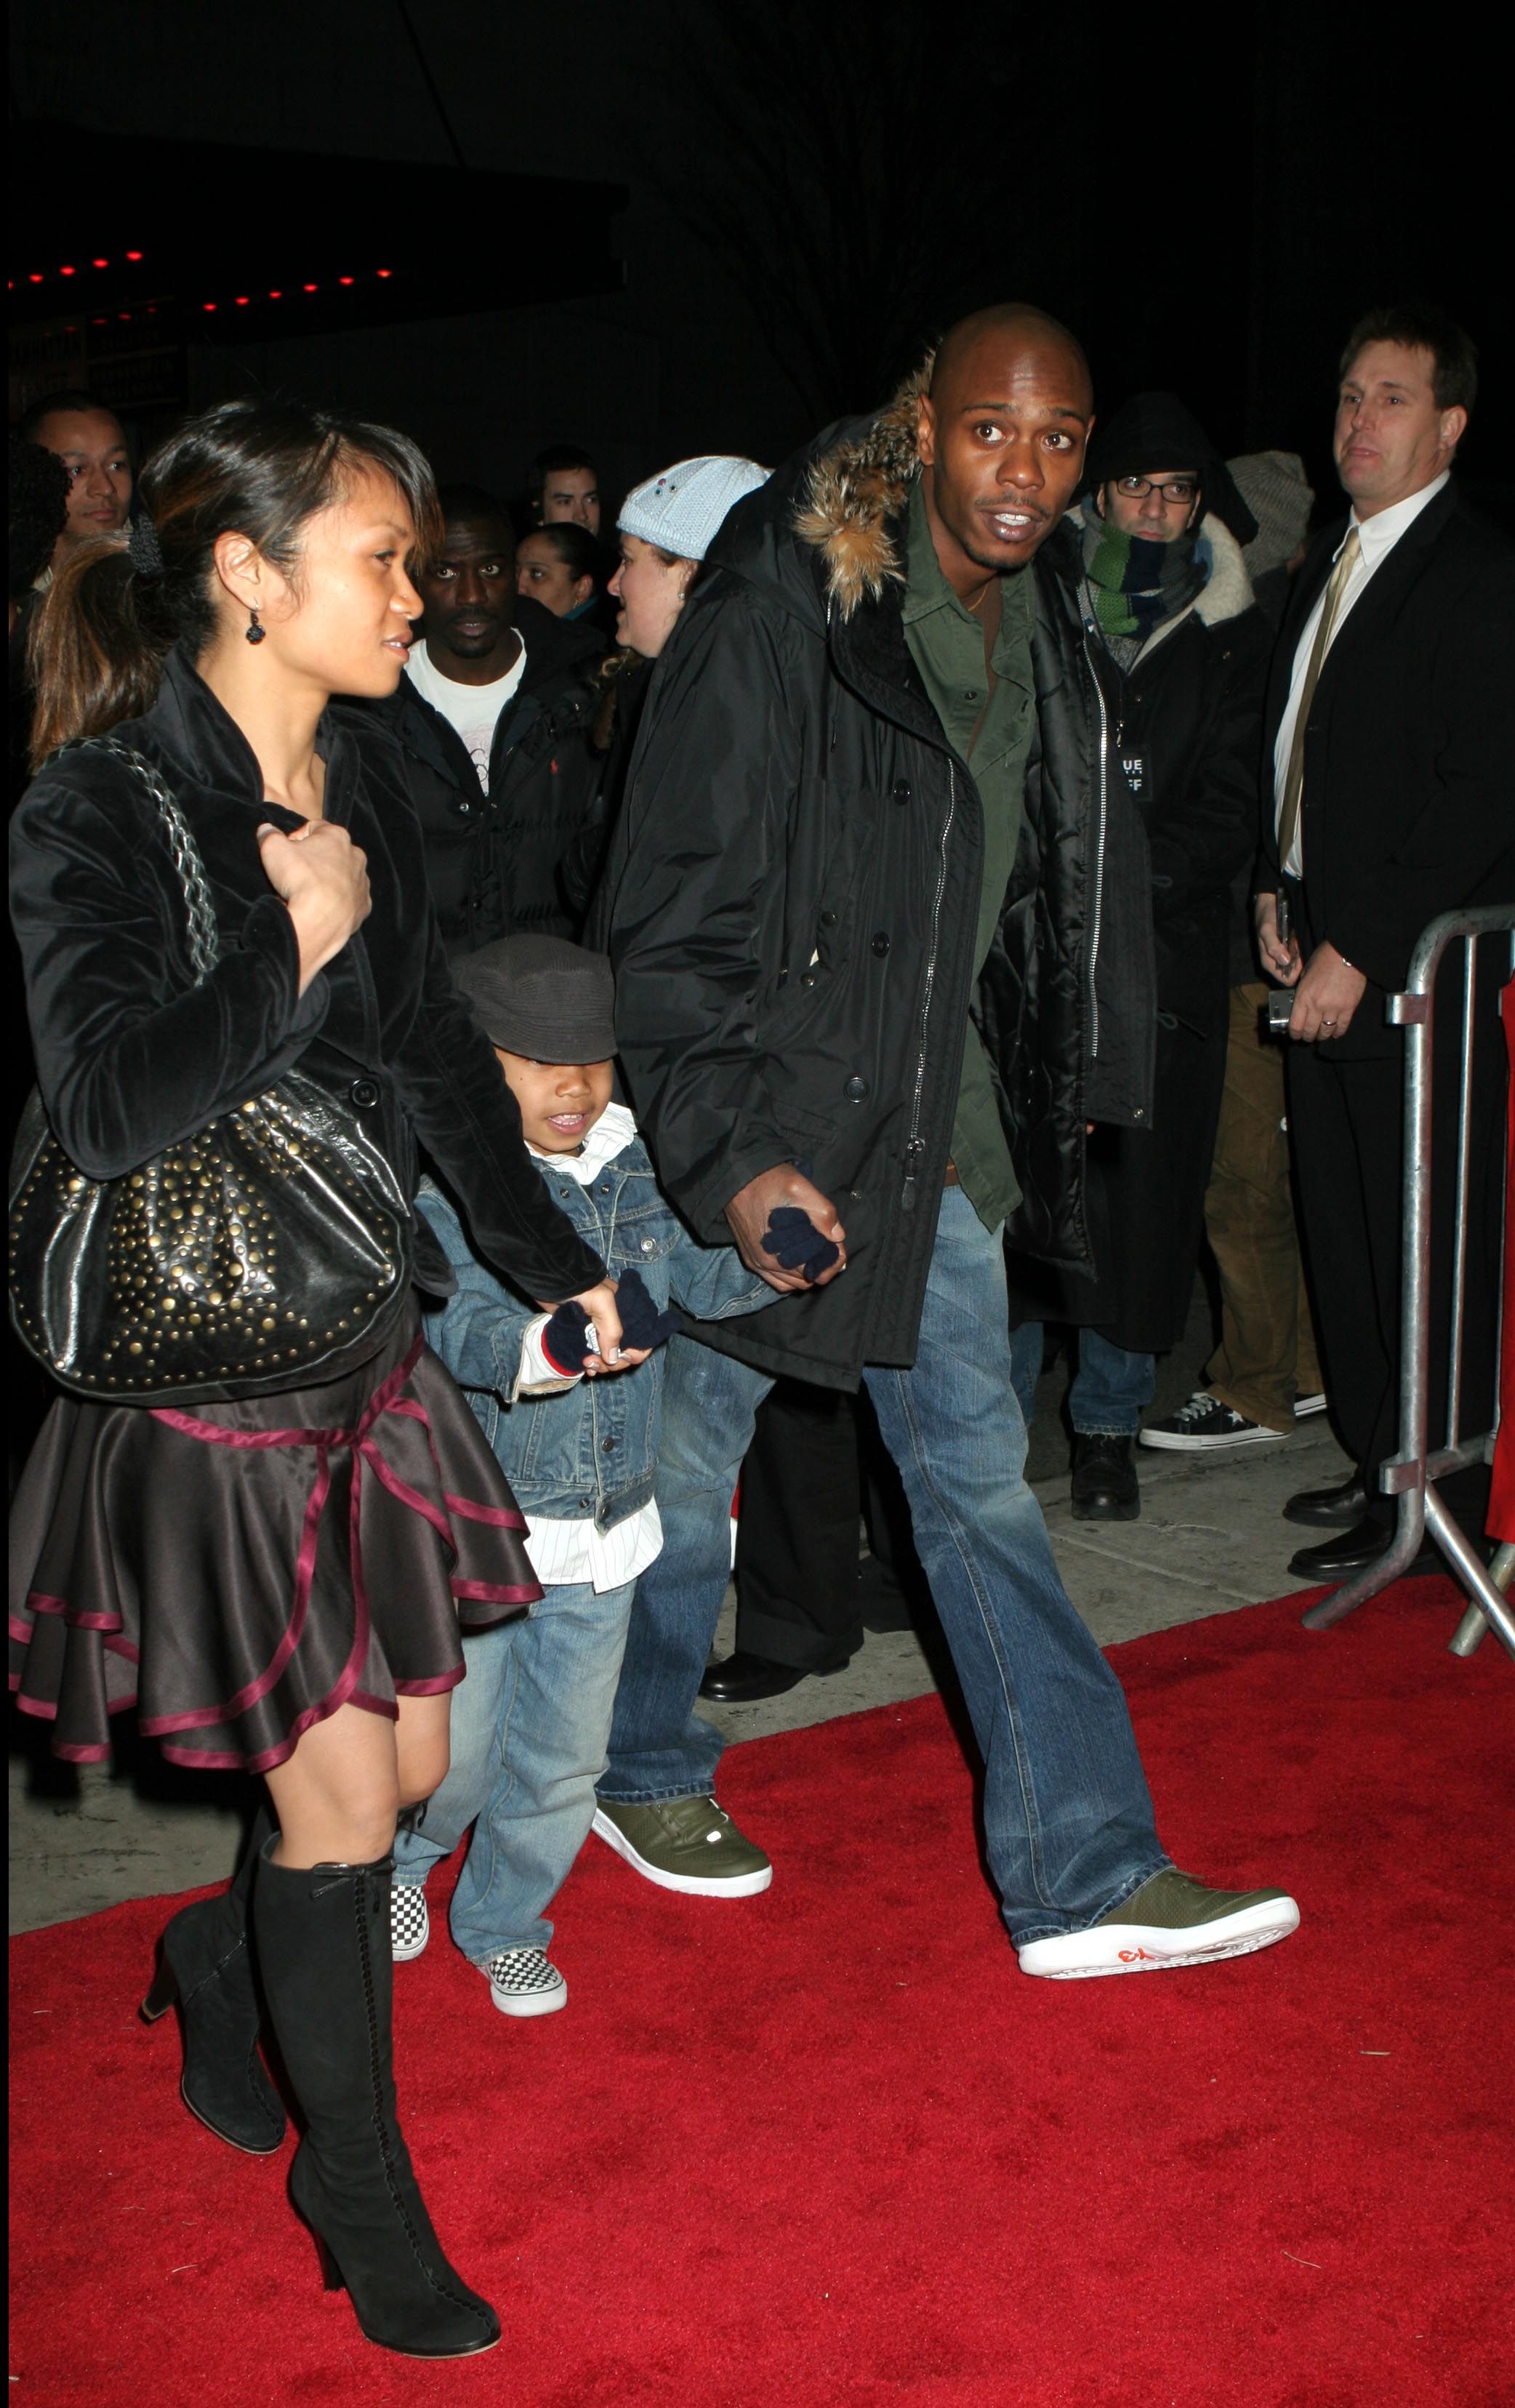 Dave Chappelle, wife Elaine, and daughter at movie premiere